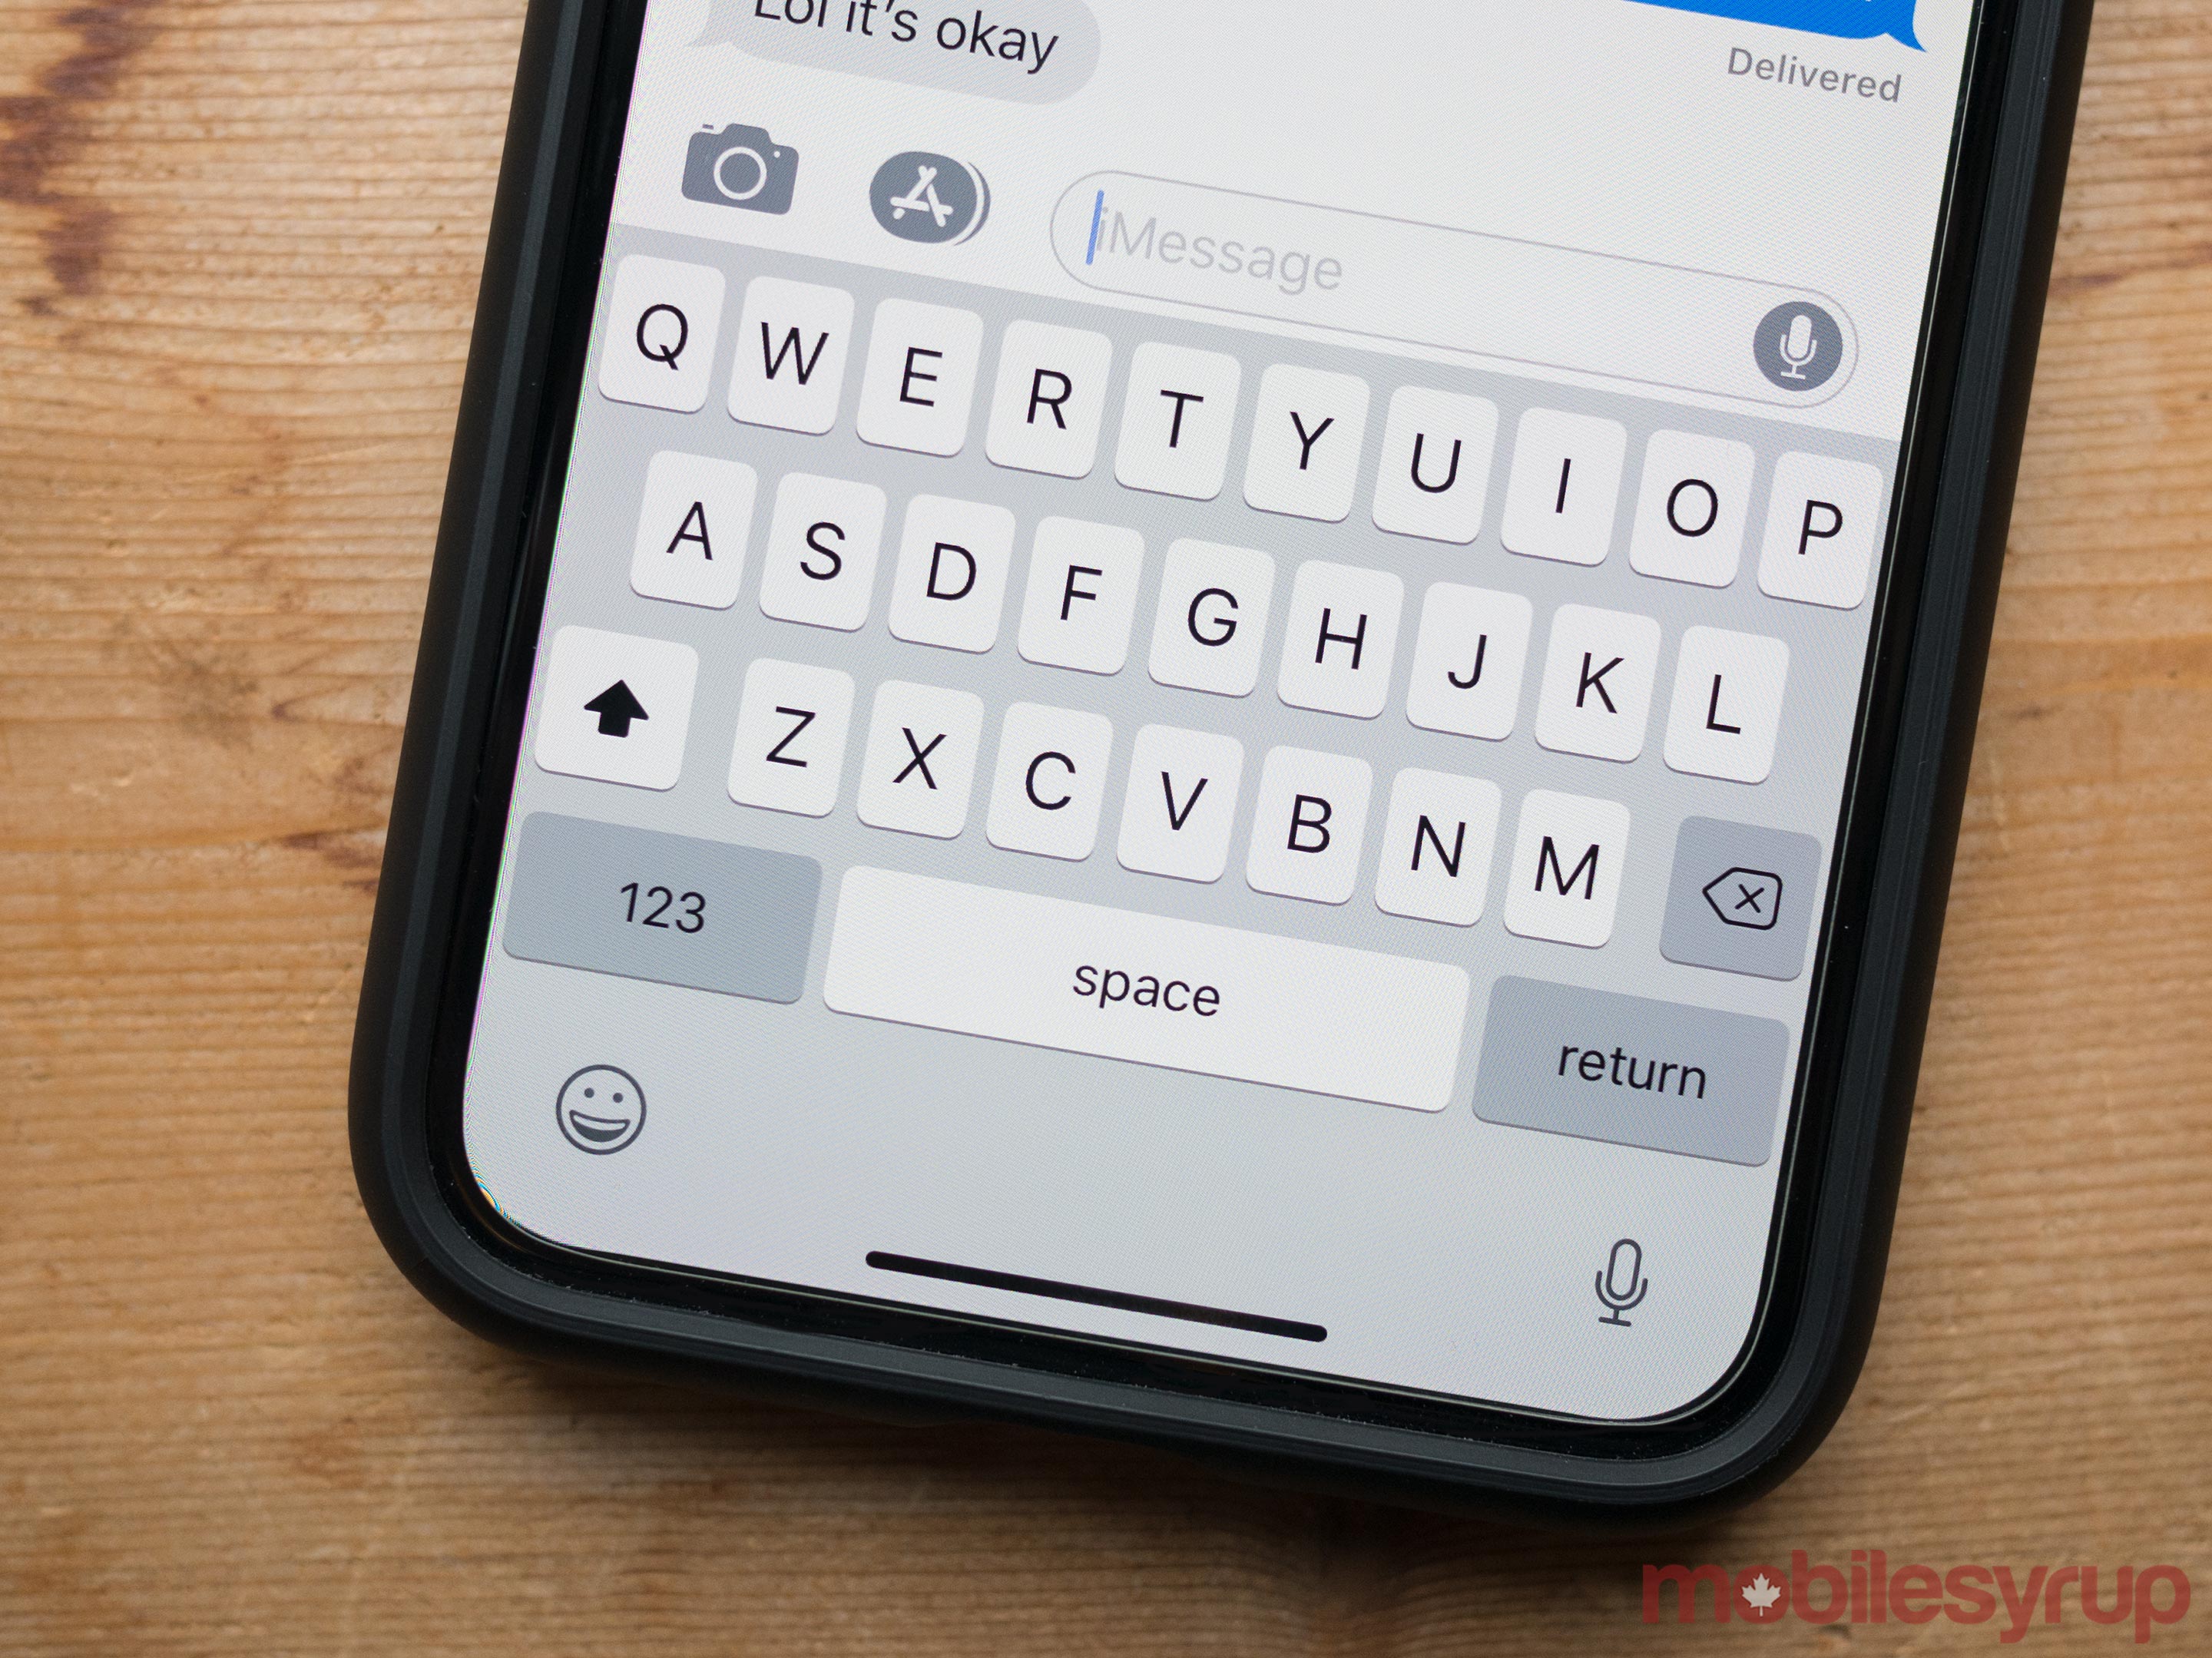 The iOS keyboard on an iPhone X -- a device without a physical home button